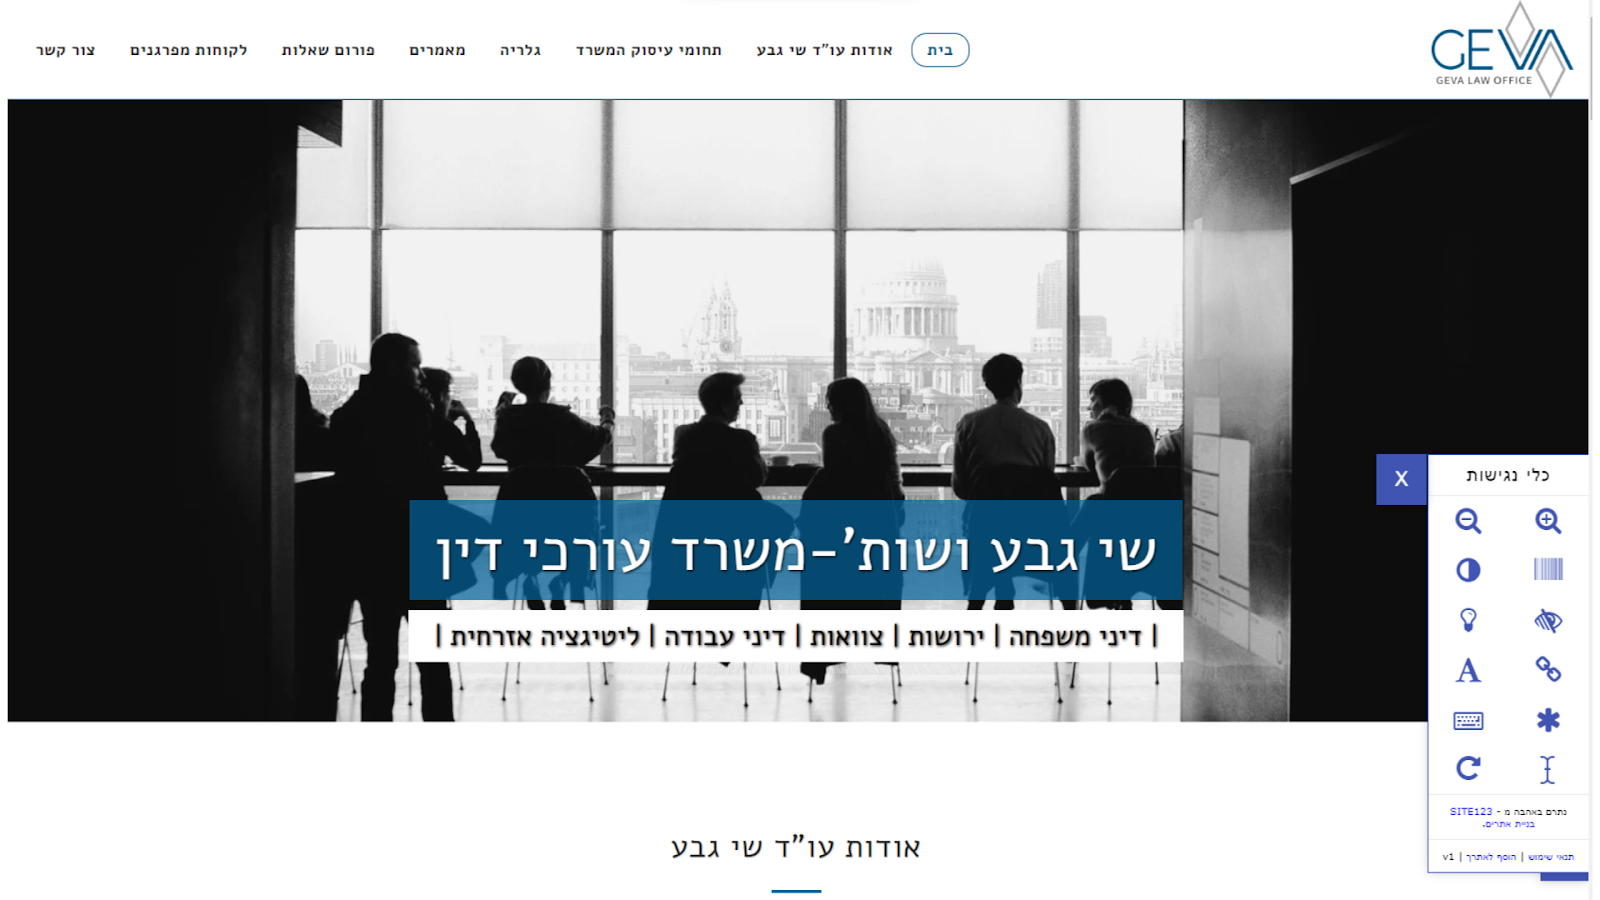 Screenshots from the Shai Geva & Co. Law Firm website made with SITE123